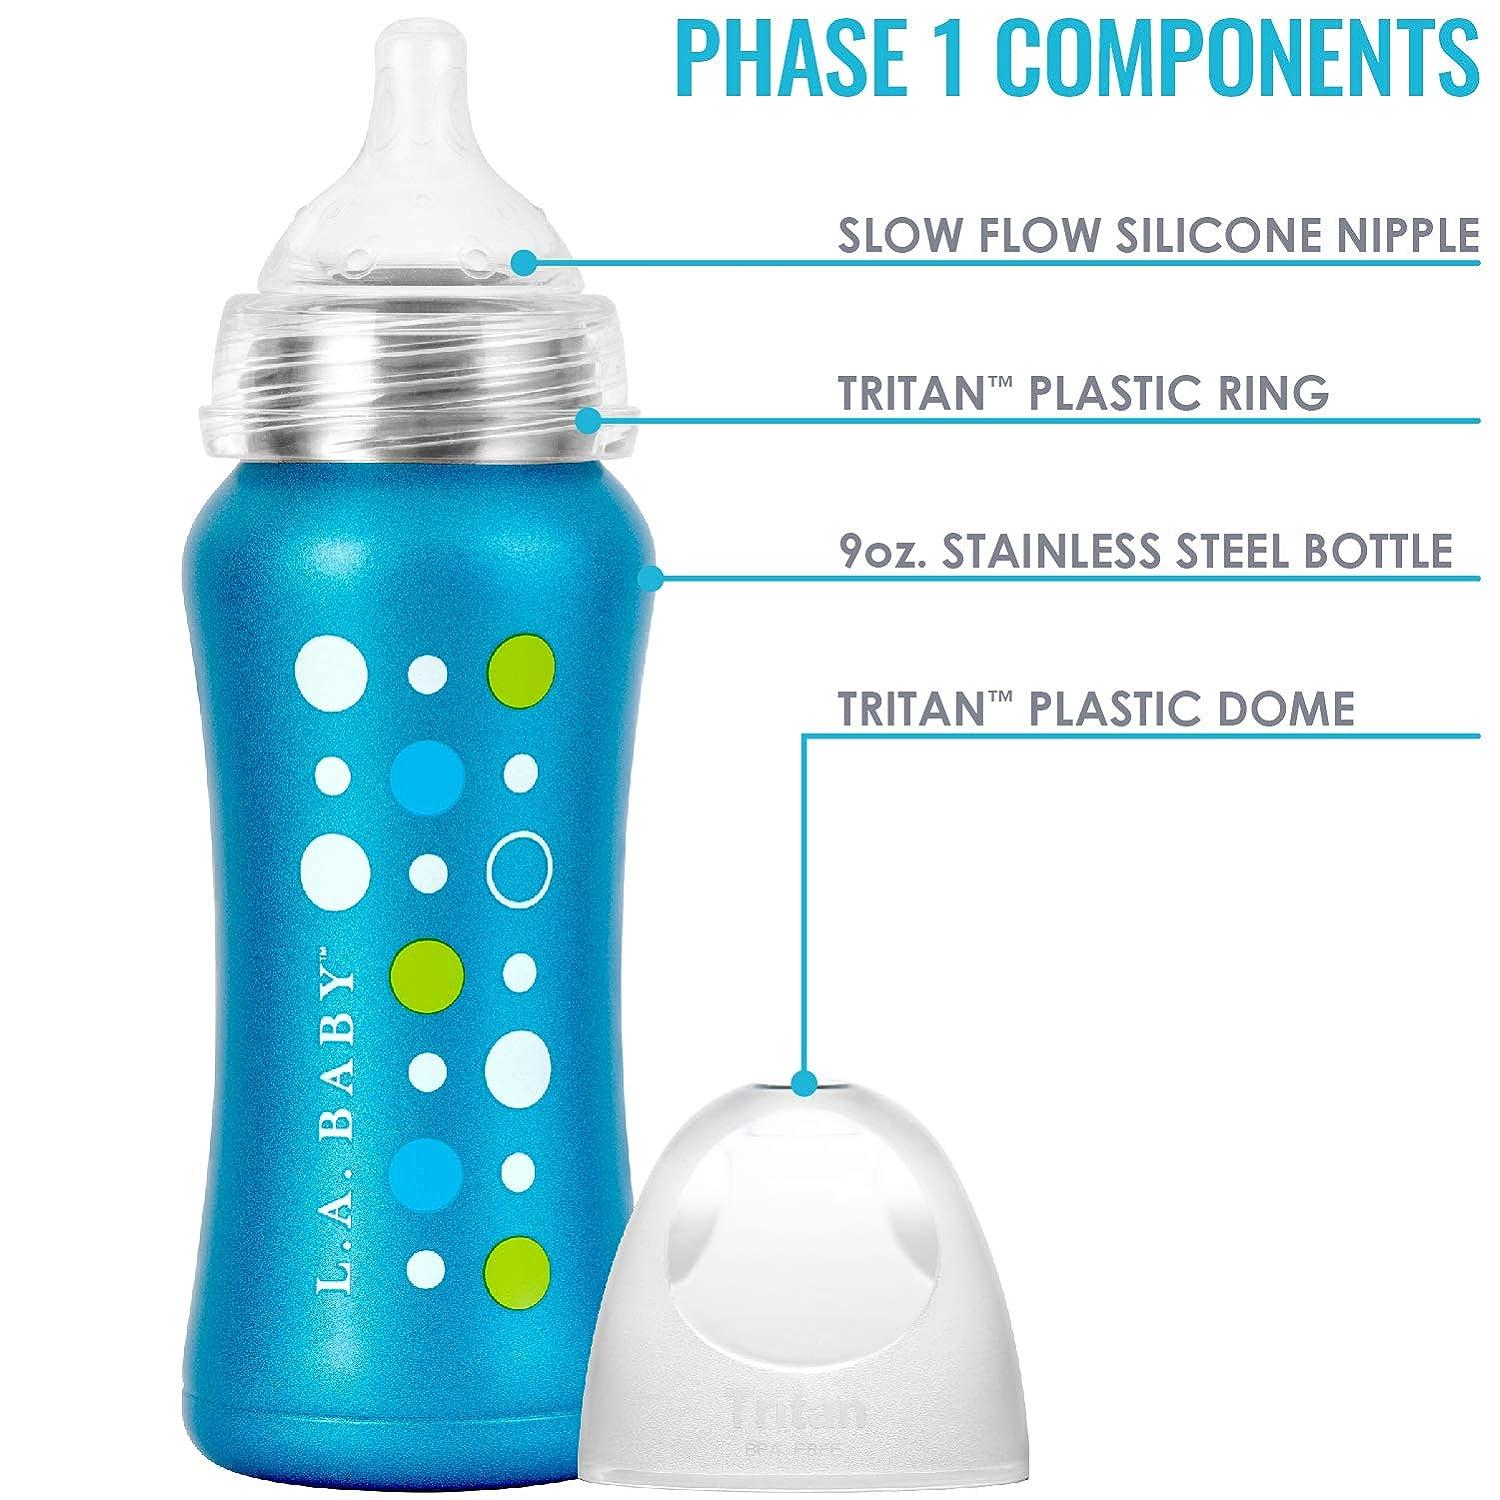 Pacific Baby GroGrow Stainless Steel Baby Bottle - NAPPA Awards